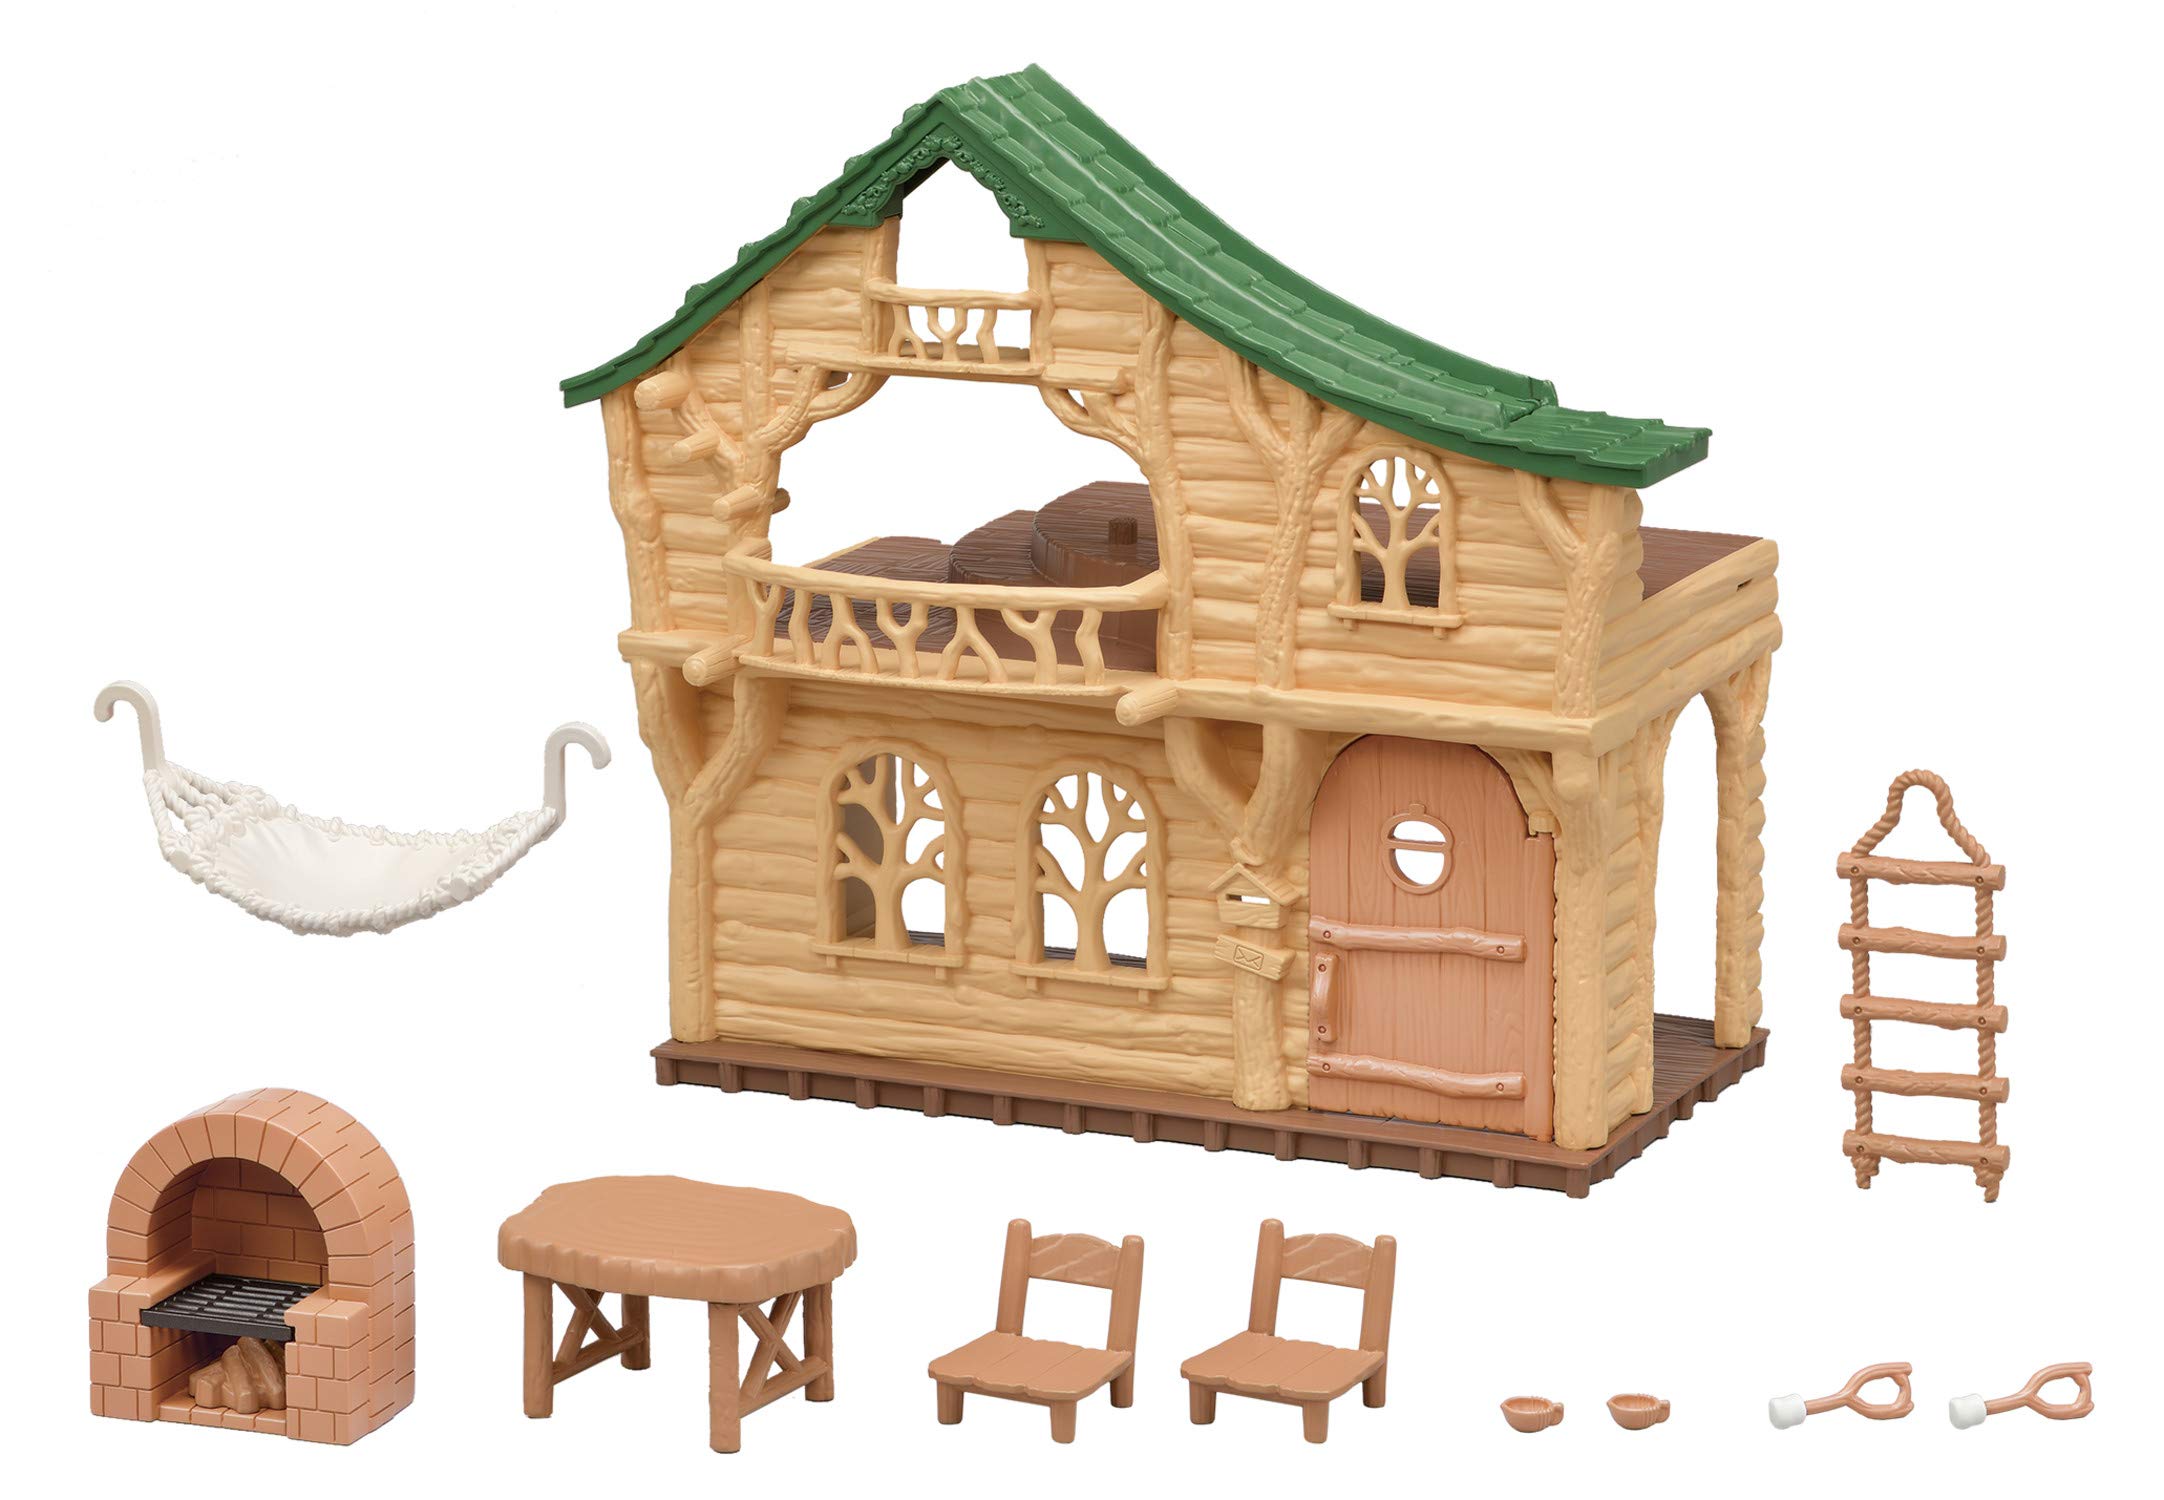 Calico Critters Lakeside Lodge Gift Set Collectible Dollhouse with Figures Furniture and Accessories Pink Medium 送料無